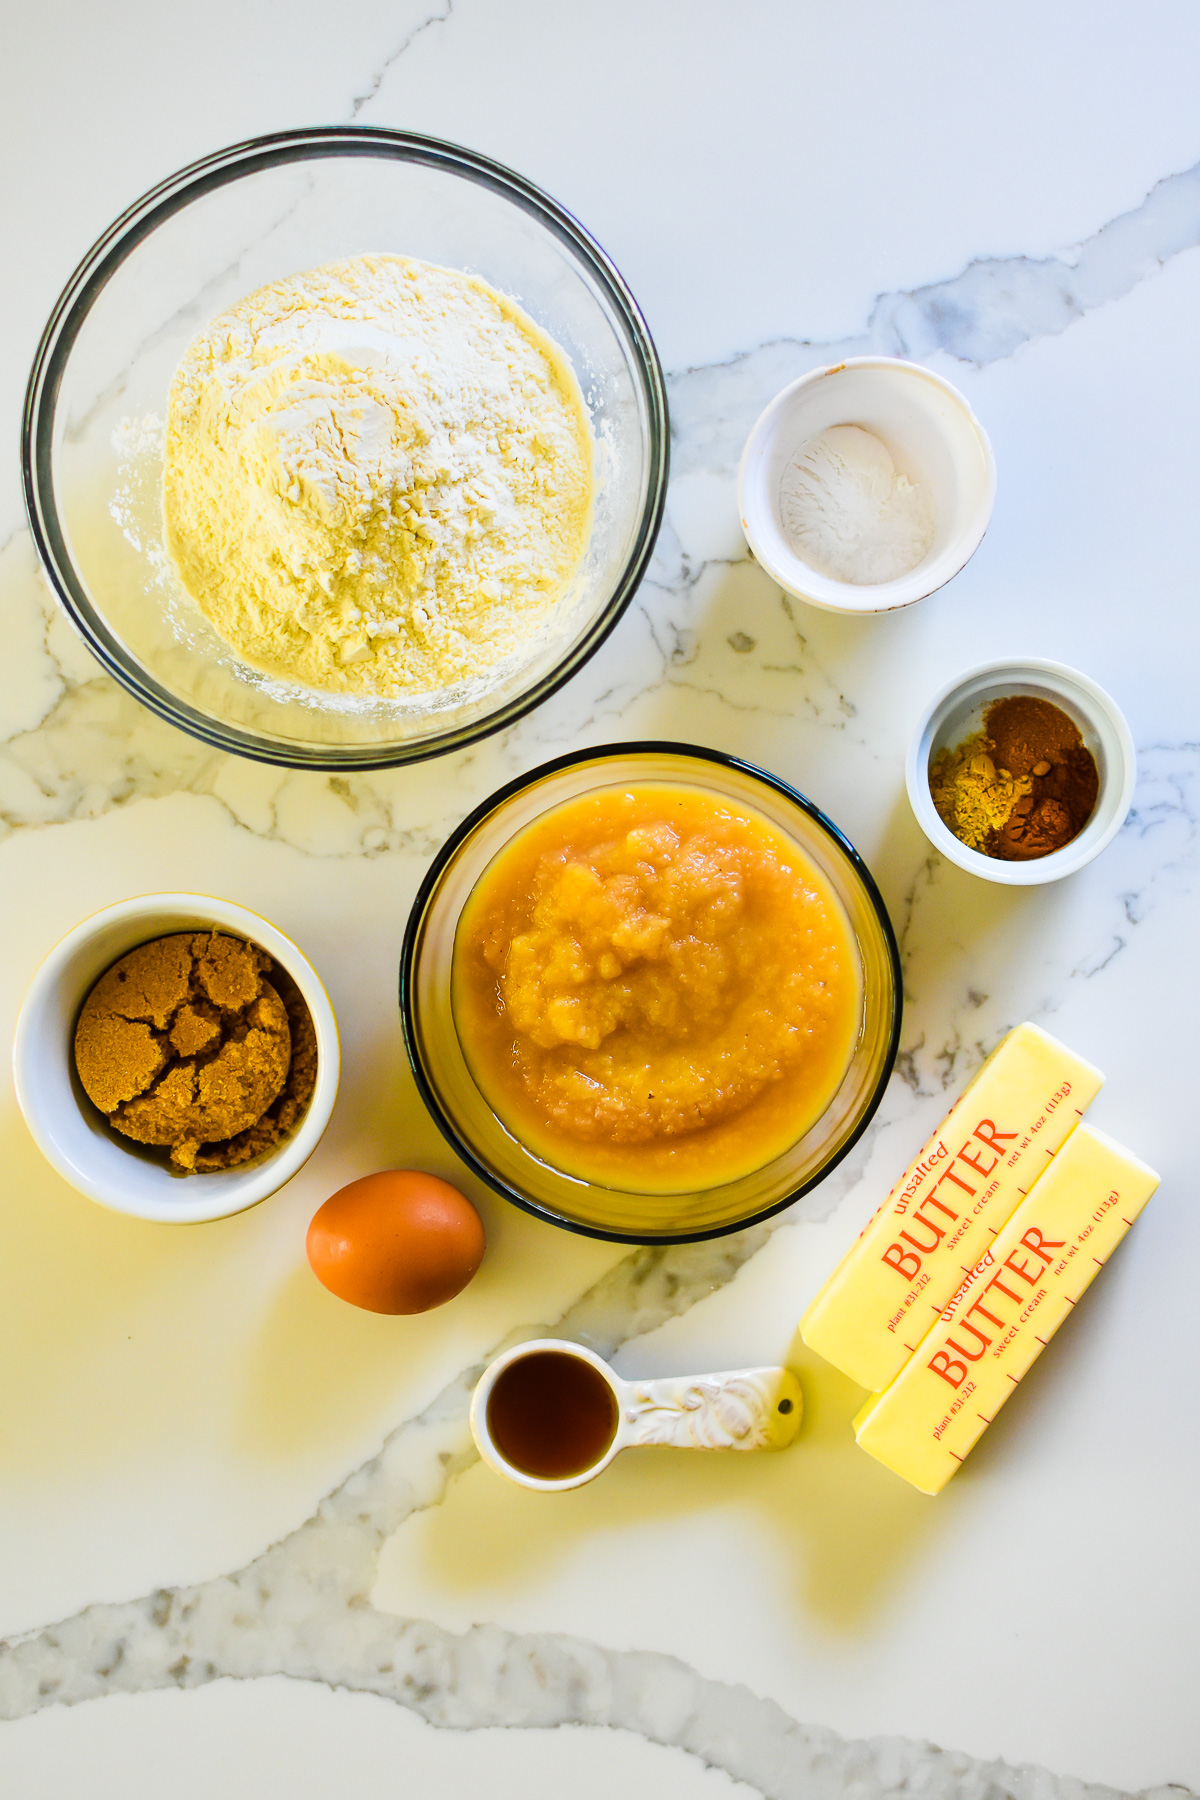 ingredients to make the best applesauce bread on granite counter top: flour, baking powder, spices, applesauce, brown sugar, egg, butter, and maple syrup.